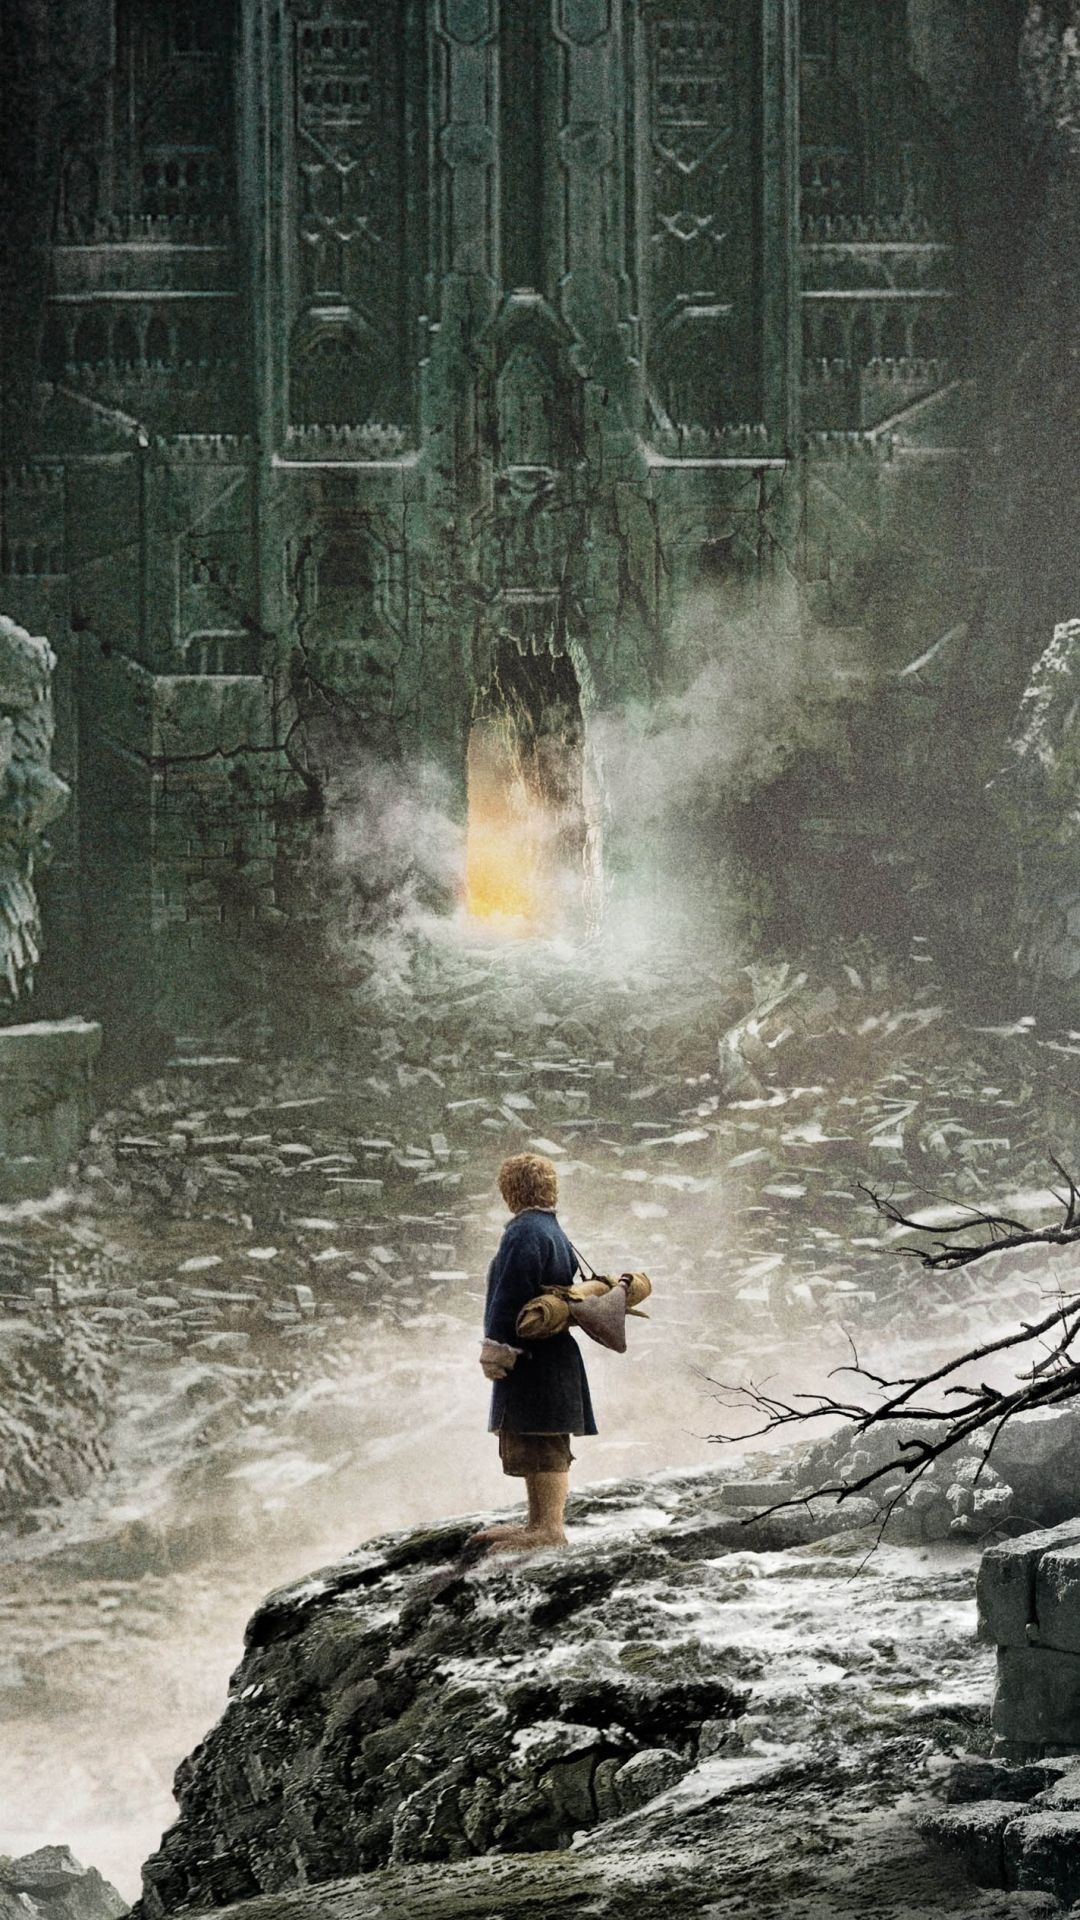 The Hobbit (Movie): Hobbits, an offshoot of the race of Men, Middle-earth. 1080x1920 Full HD Background.